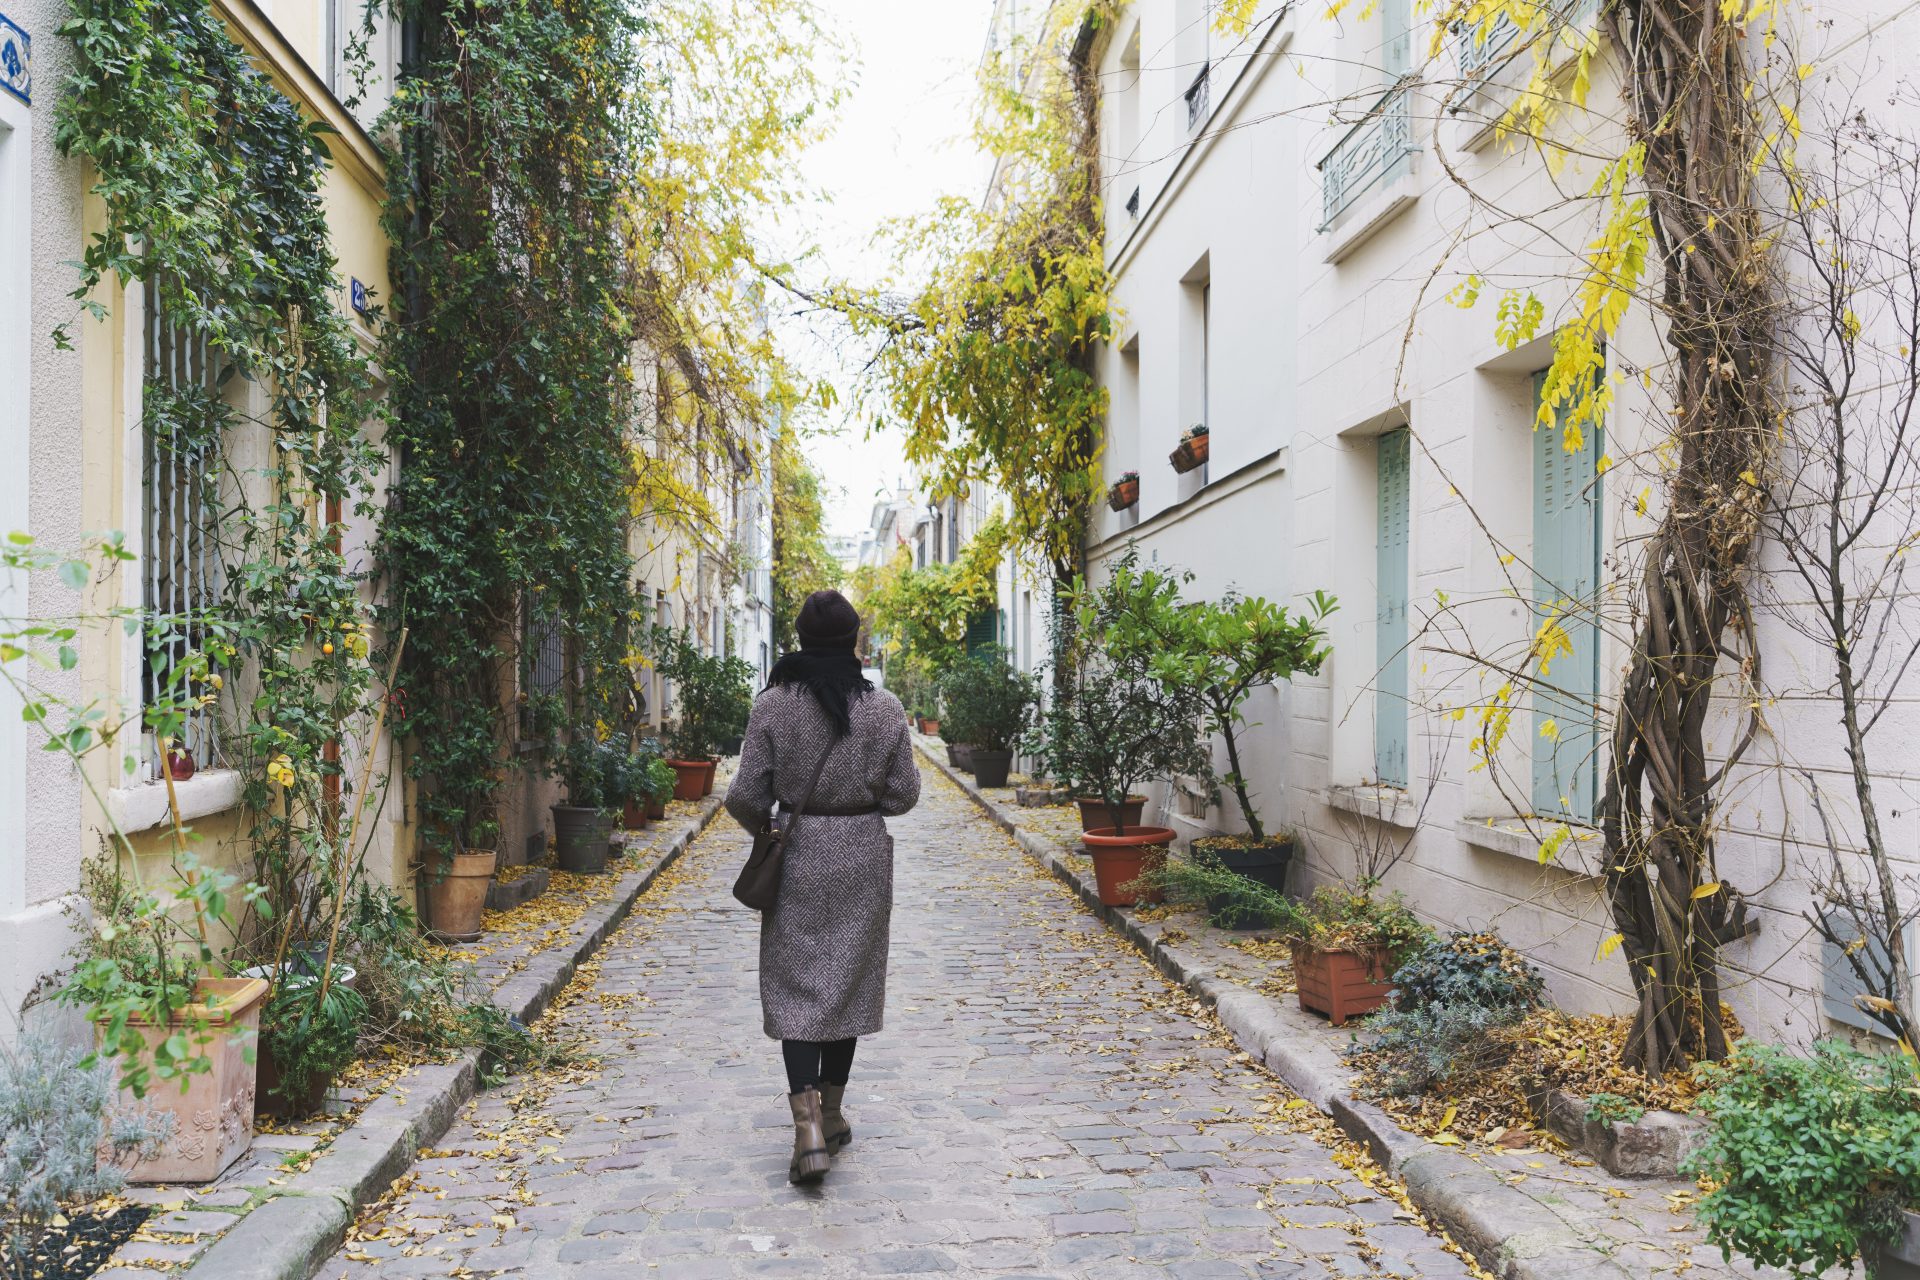 <p>Let's head to the 14th arrondissement to wander down Rue des Thermopyles. Full of charm and poetry, you'll adore this cobblestone street for its colorful facades, wooden shutters, and buildings adorned with climbing plants.</p>